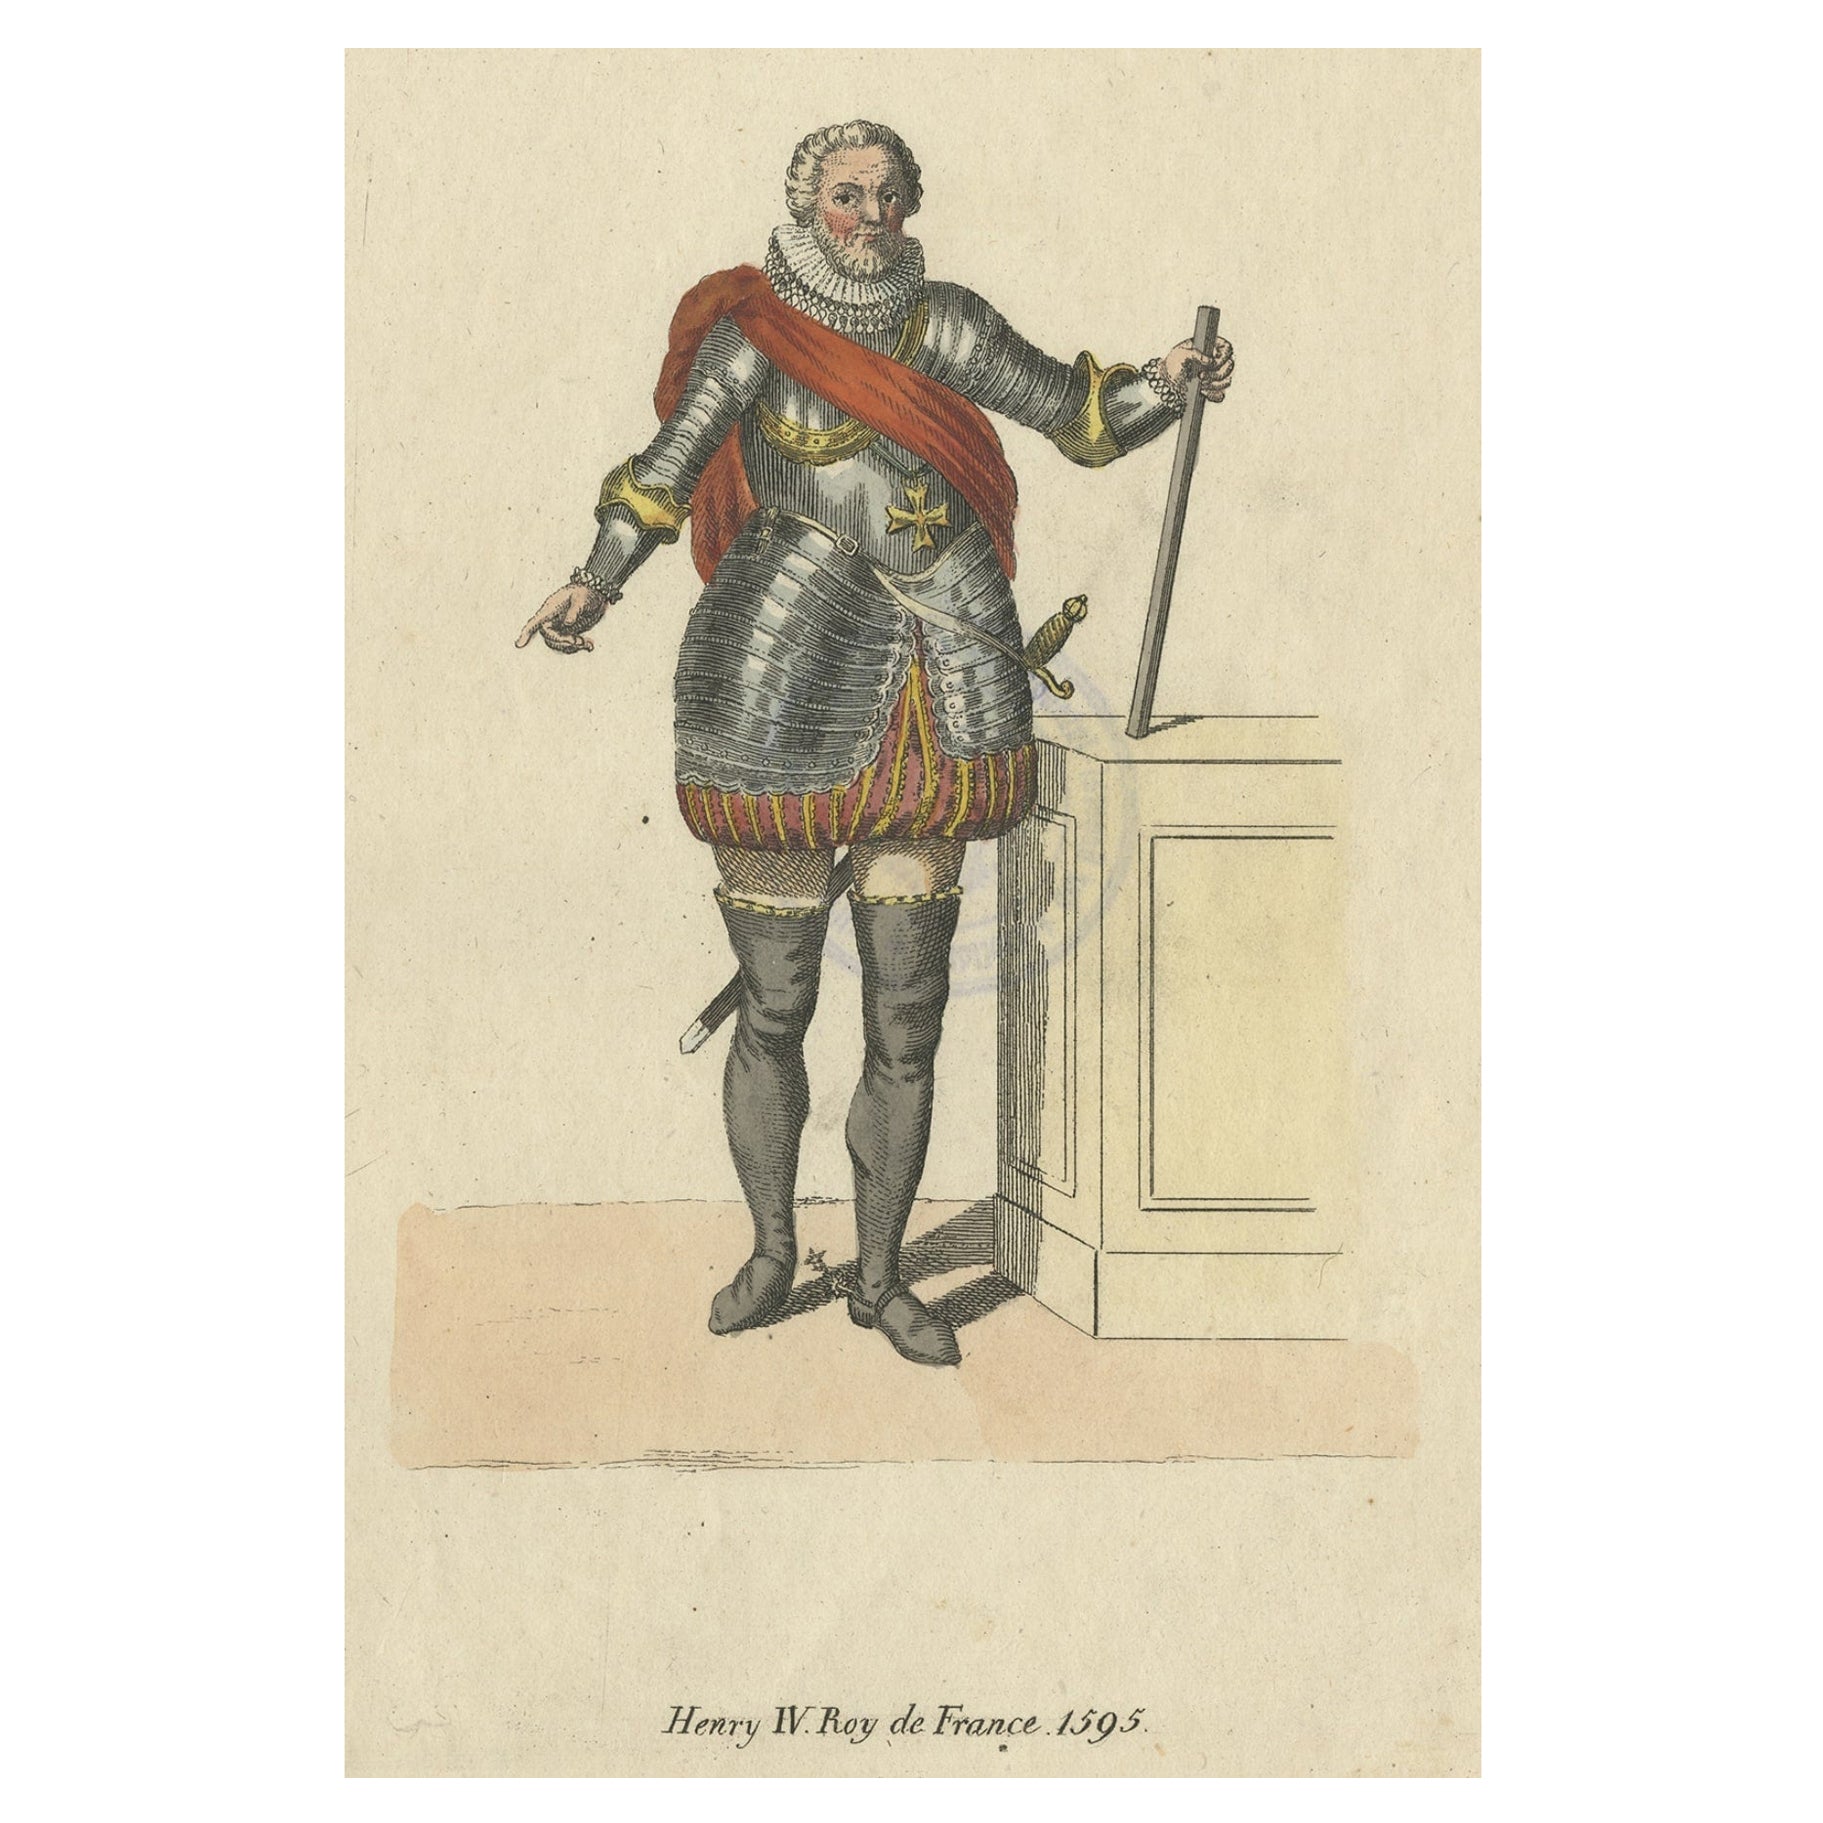 Old Print of King of France Henry IV or Good King Henry or Henry the Great, 1805